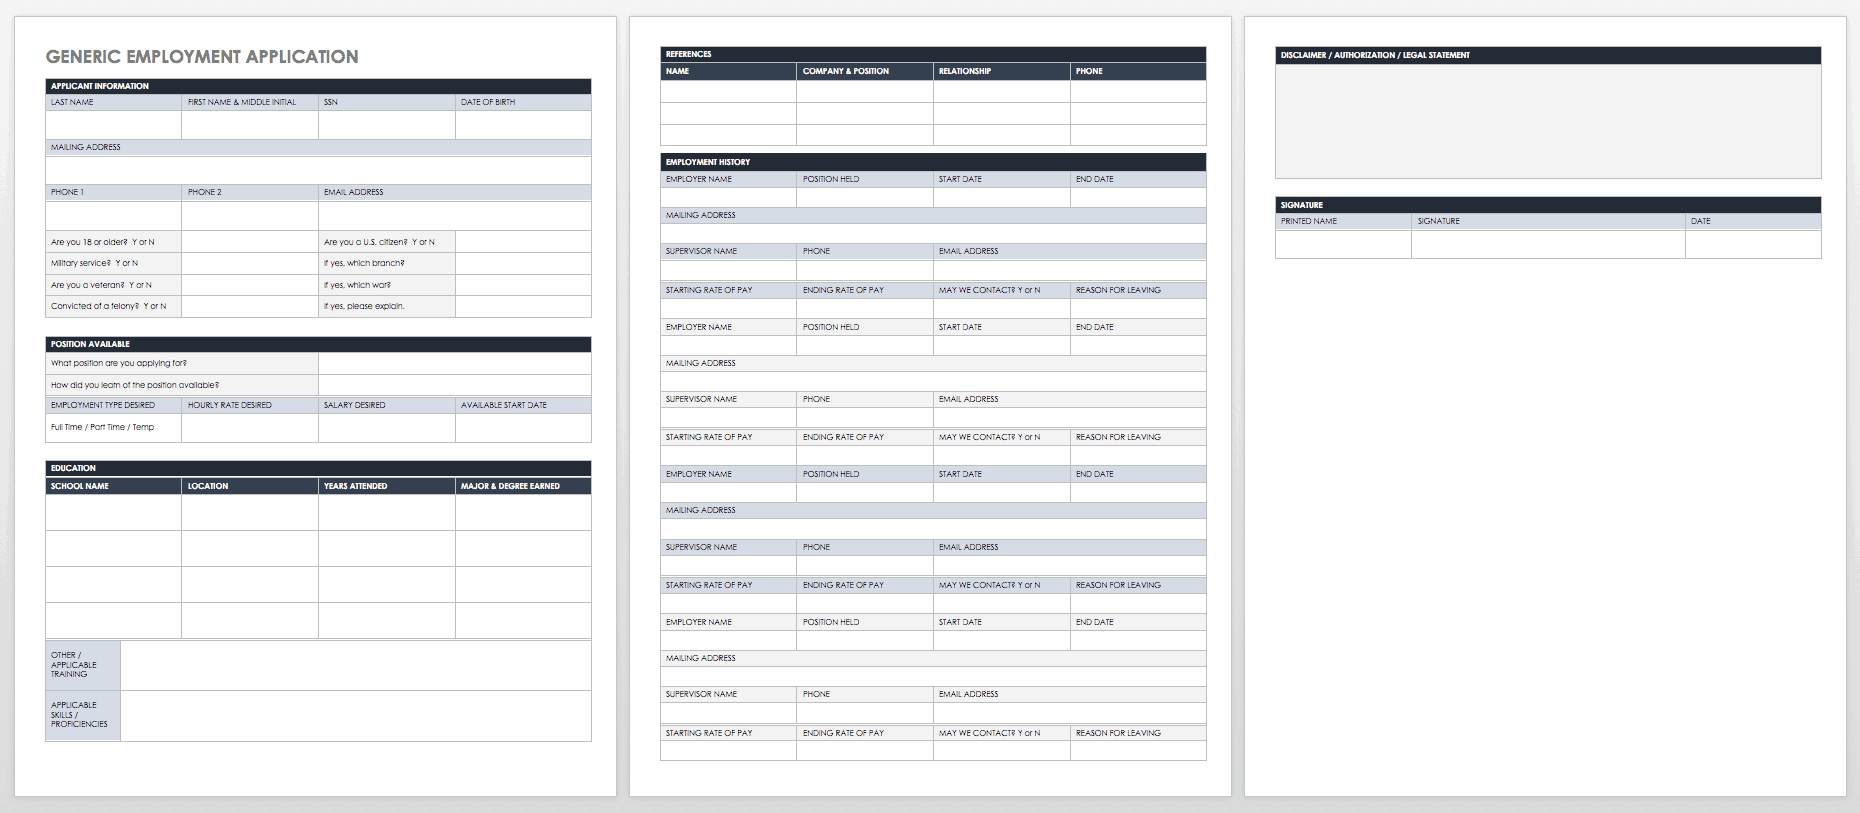 Free Employment Application Templates | Smartsheet Within Employment Application Template Microsoft Word